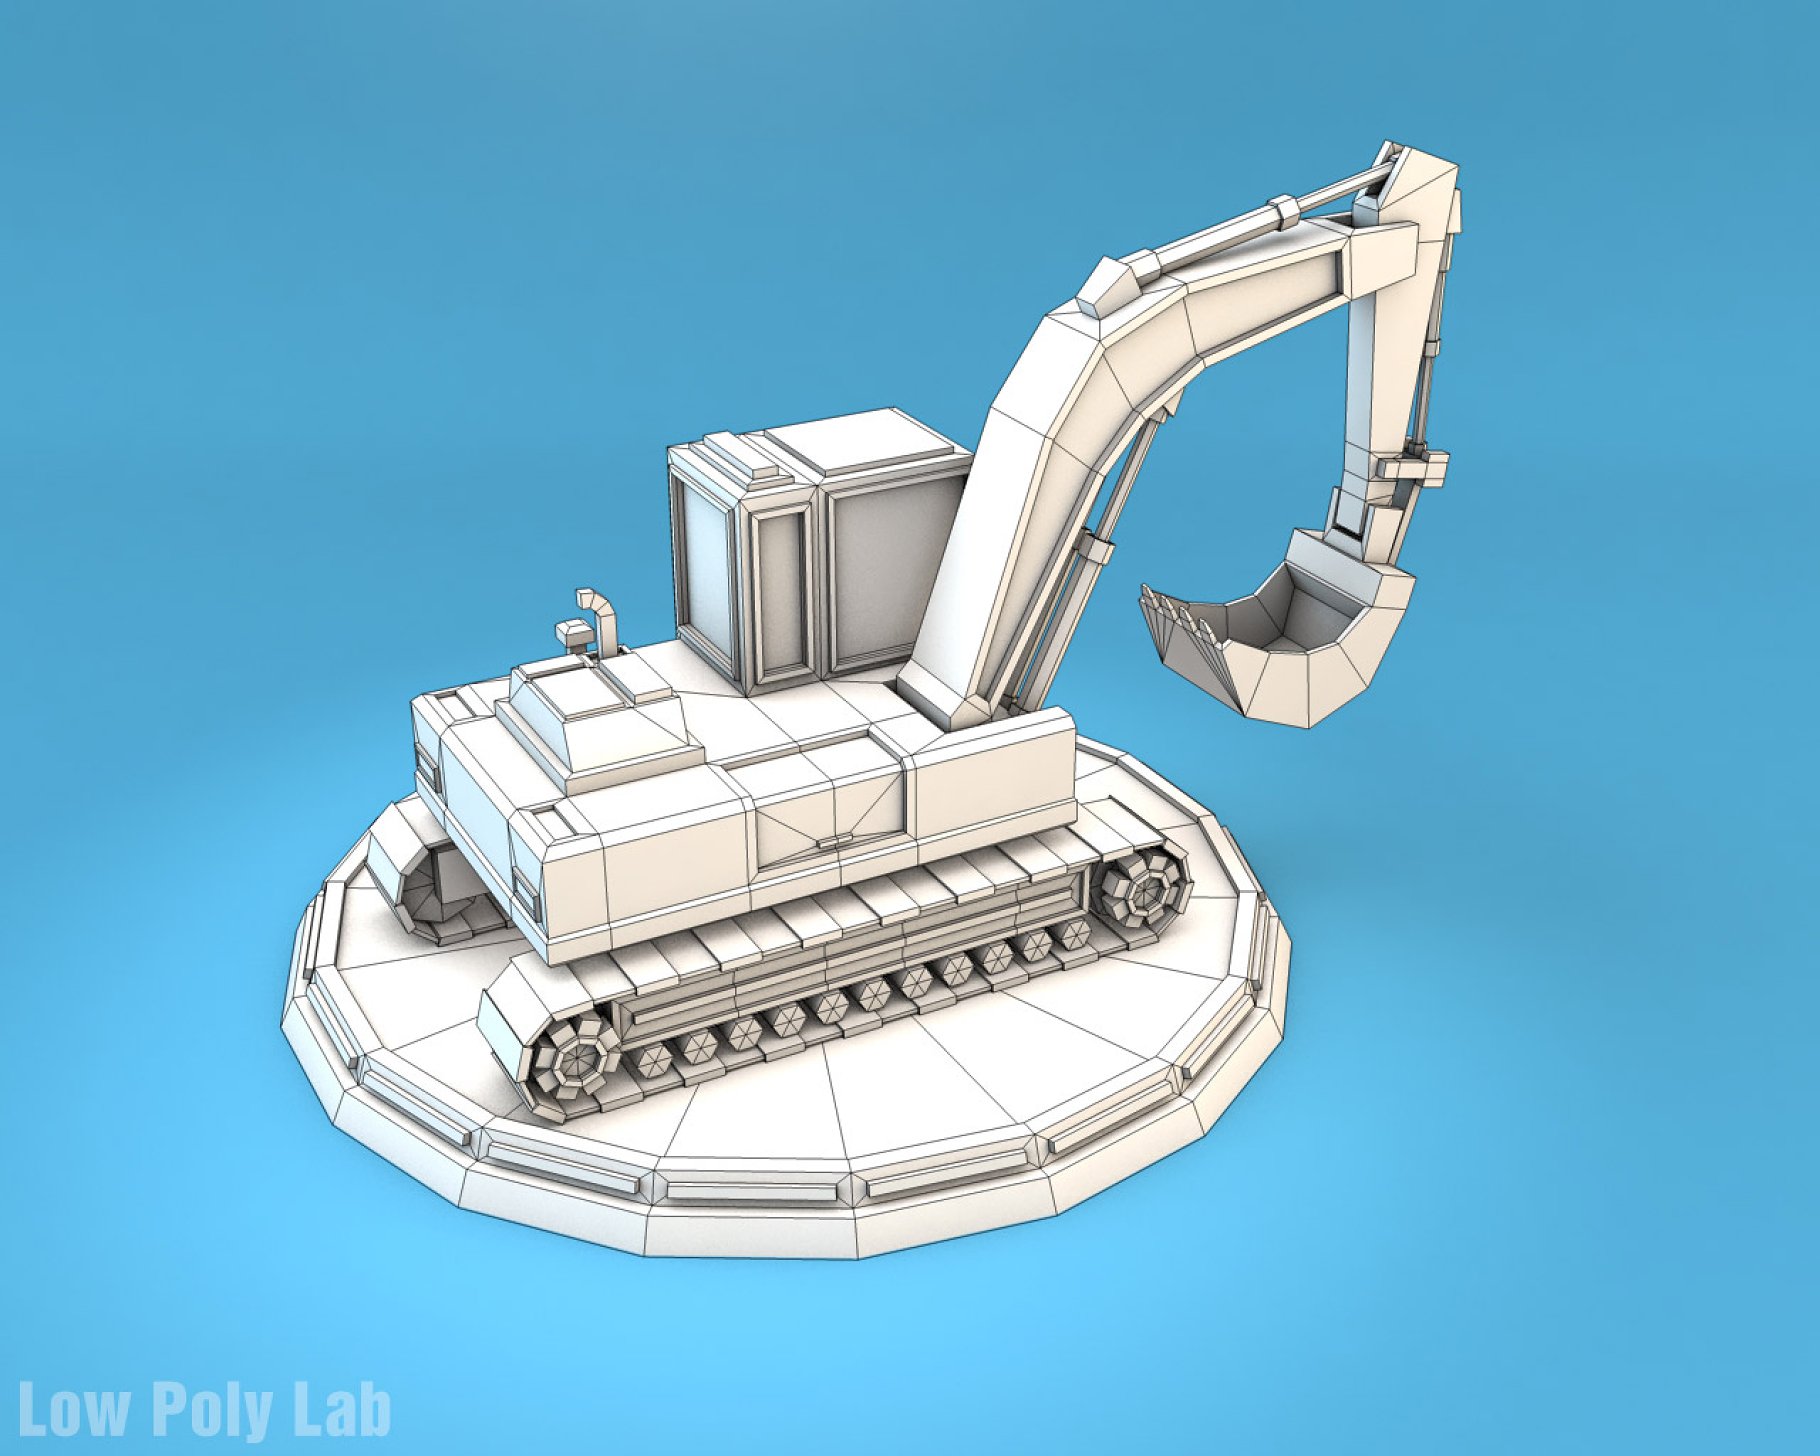 Gray mockup in right of low poly excavator on a blue background.